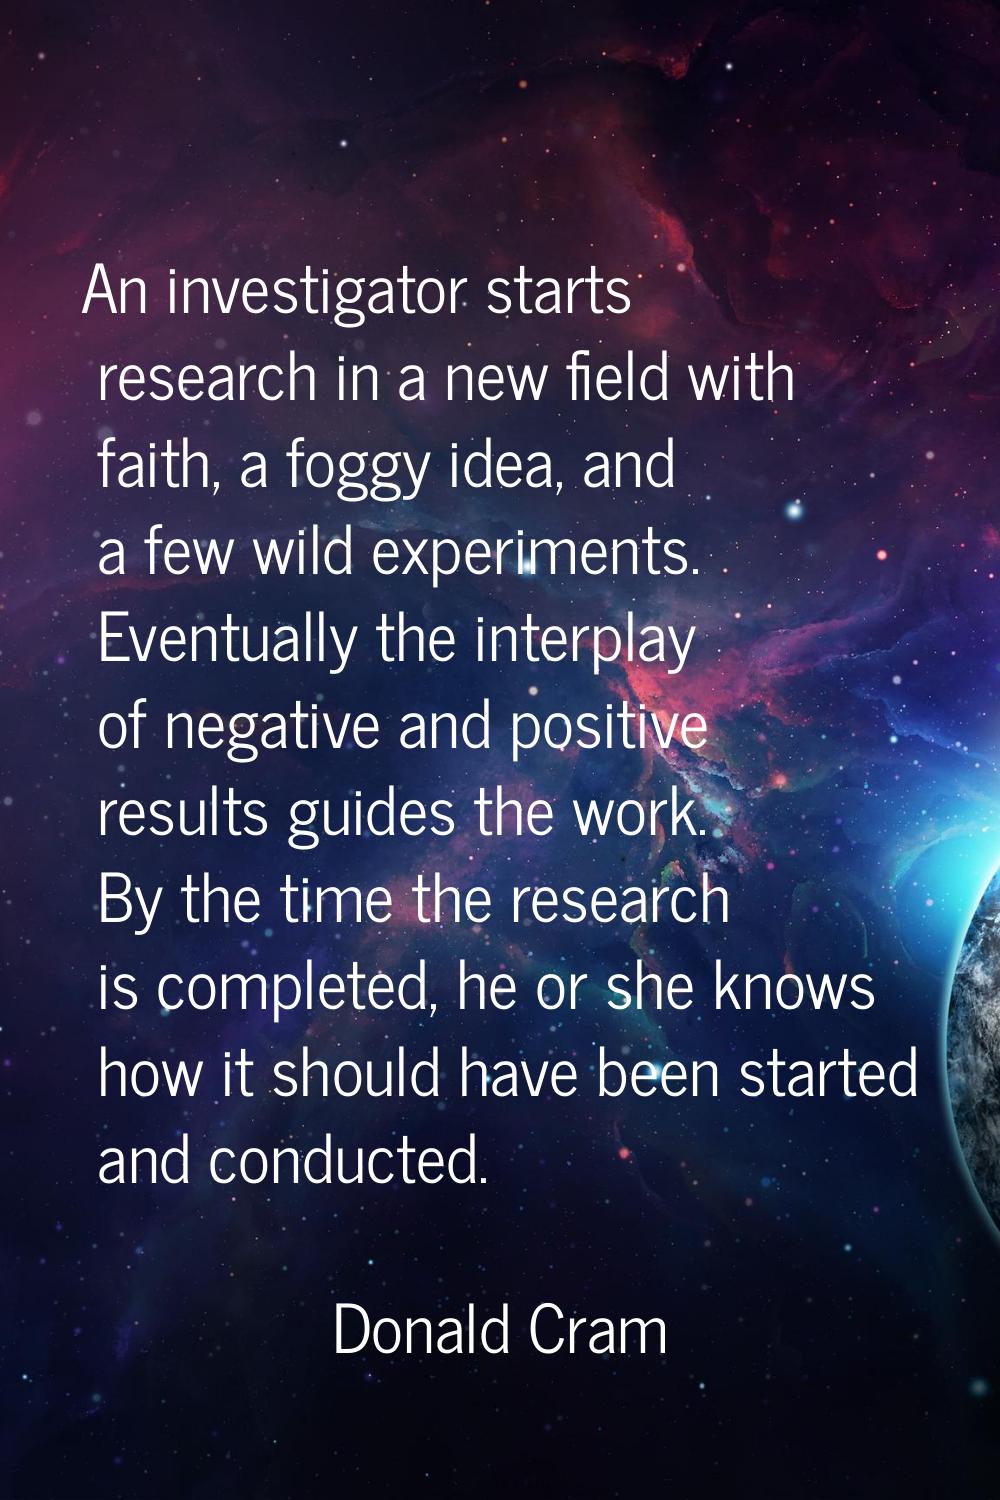 An investigator starts research in a new field with faith, a foggy idea, and a few wild experiments